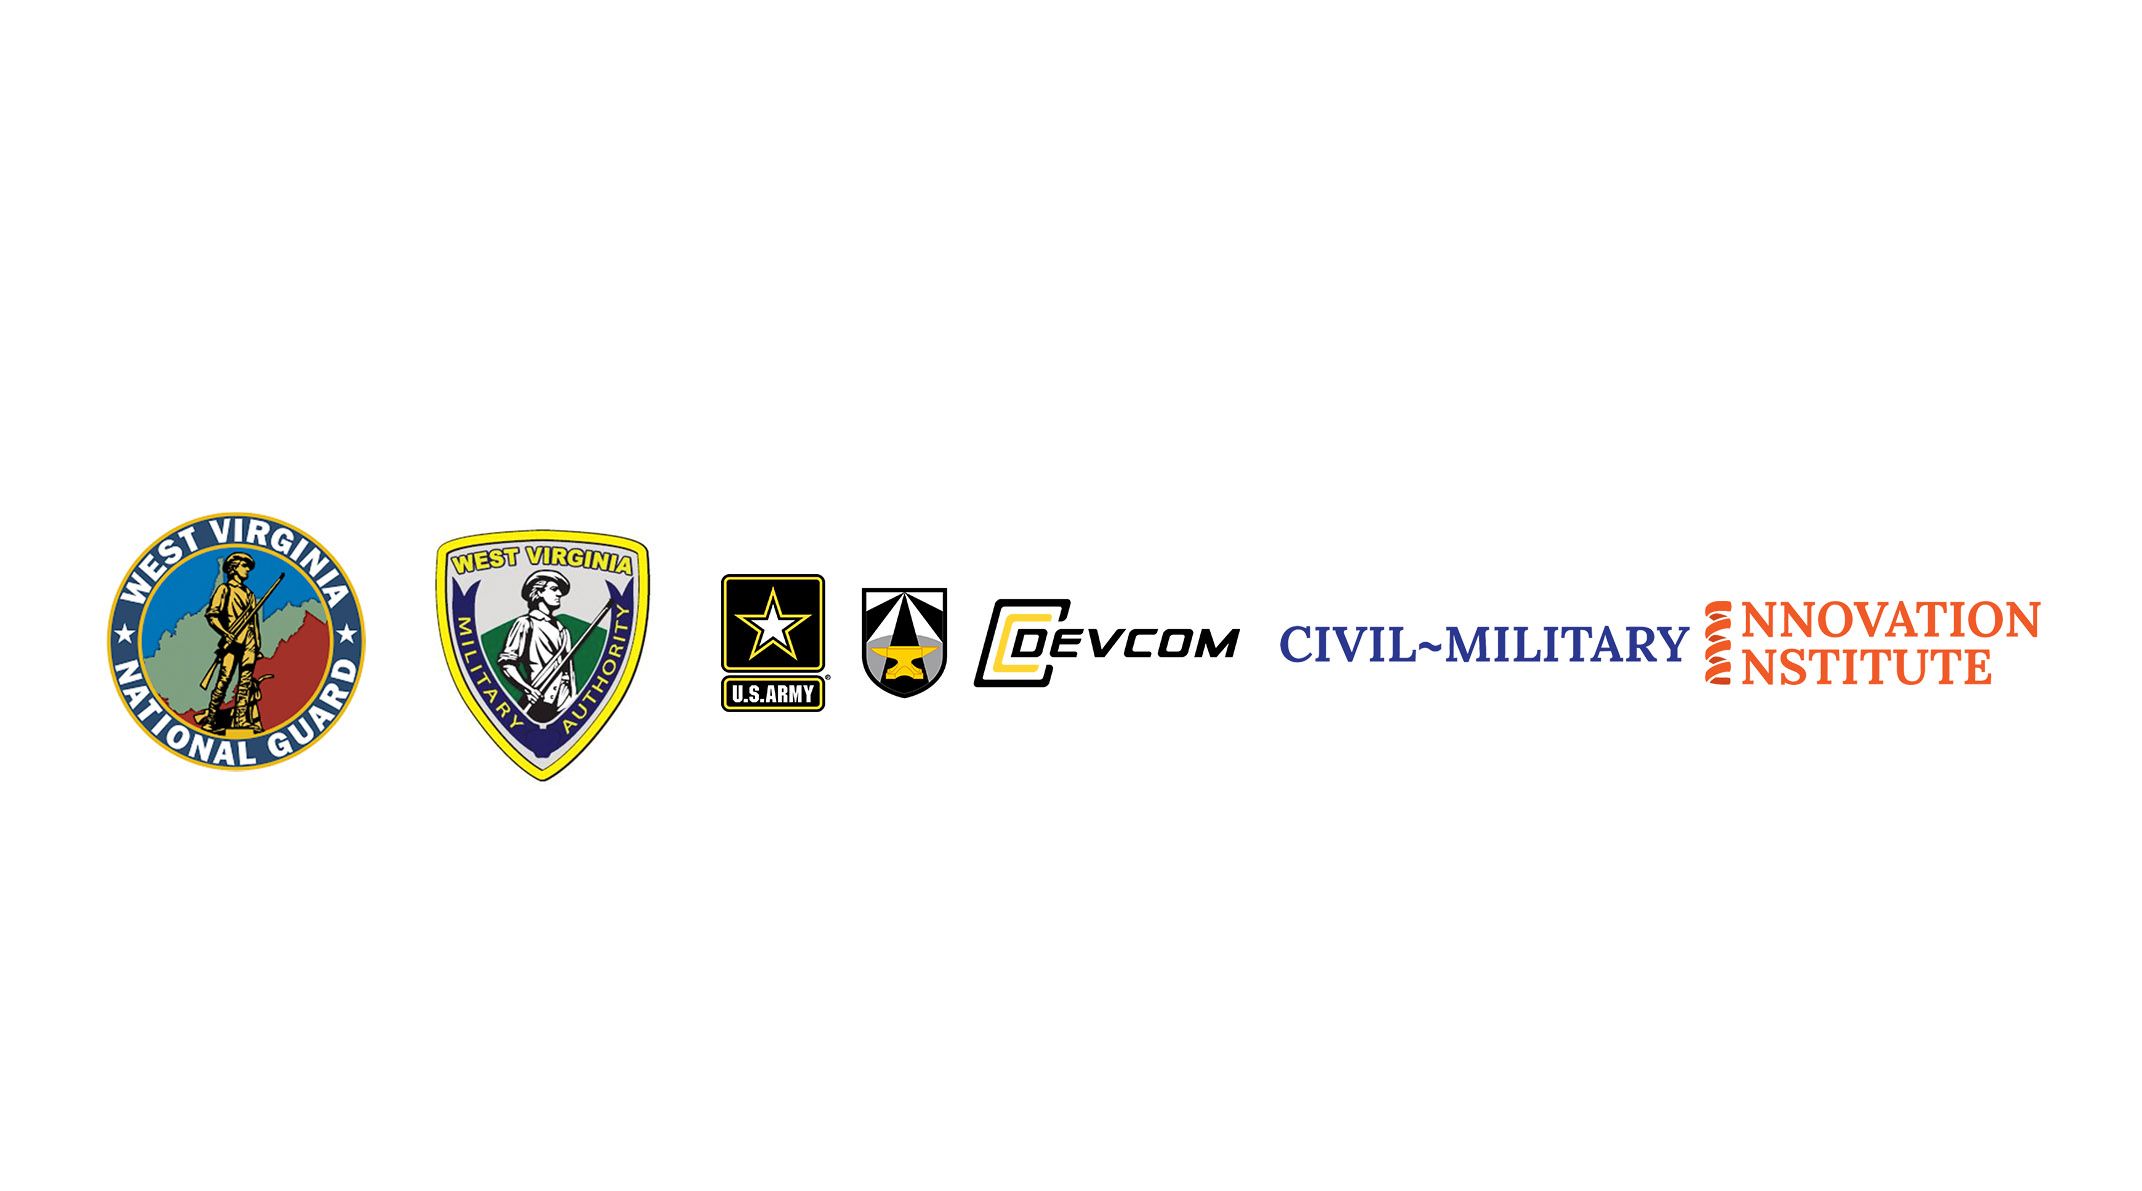 West Virginia Military Authority, Army Sign Agreement To Create Solutions  To Technology Challenges - Cmi2